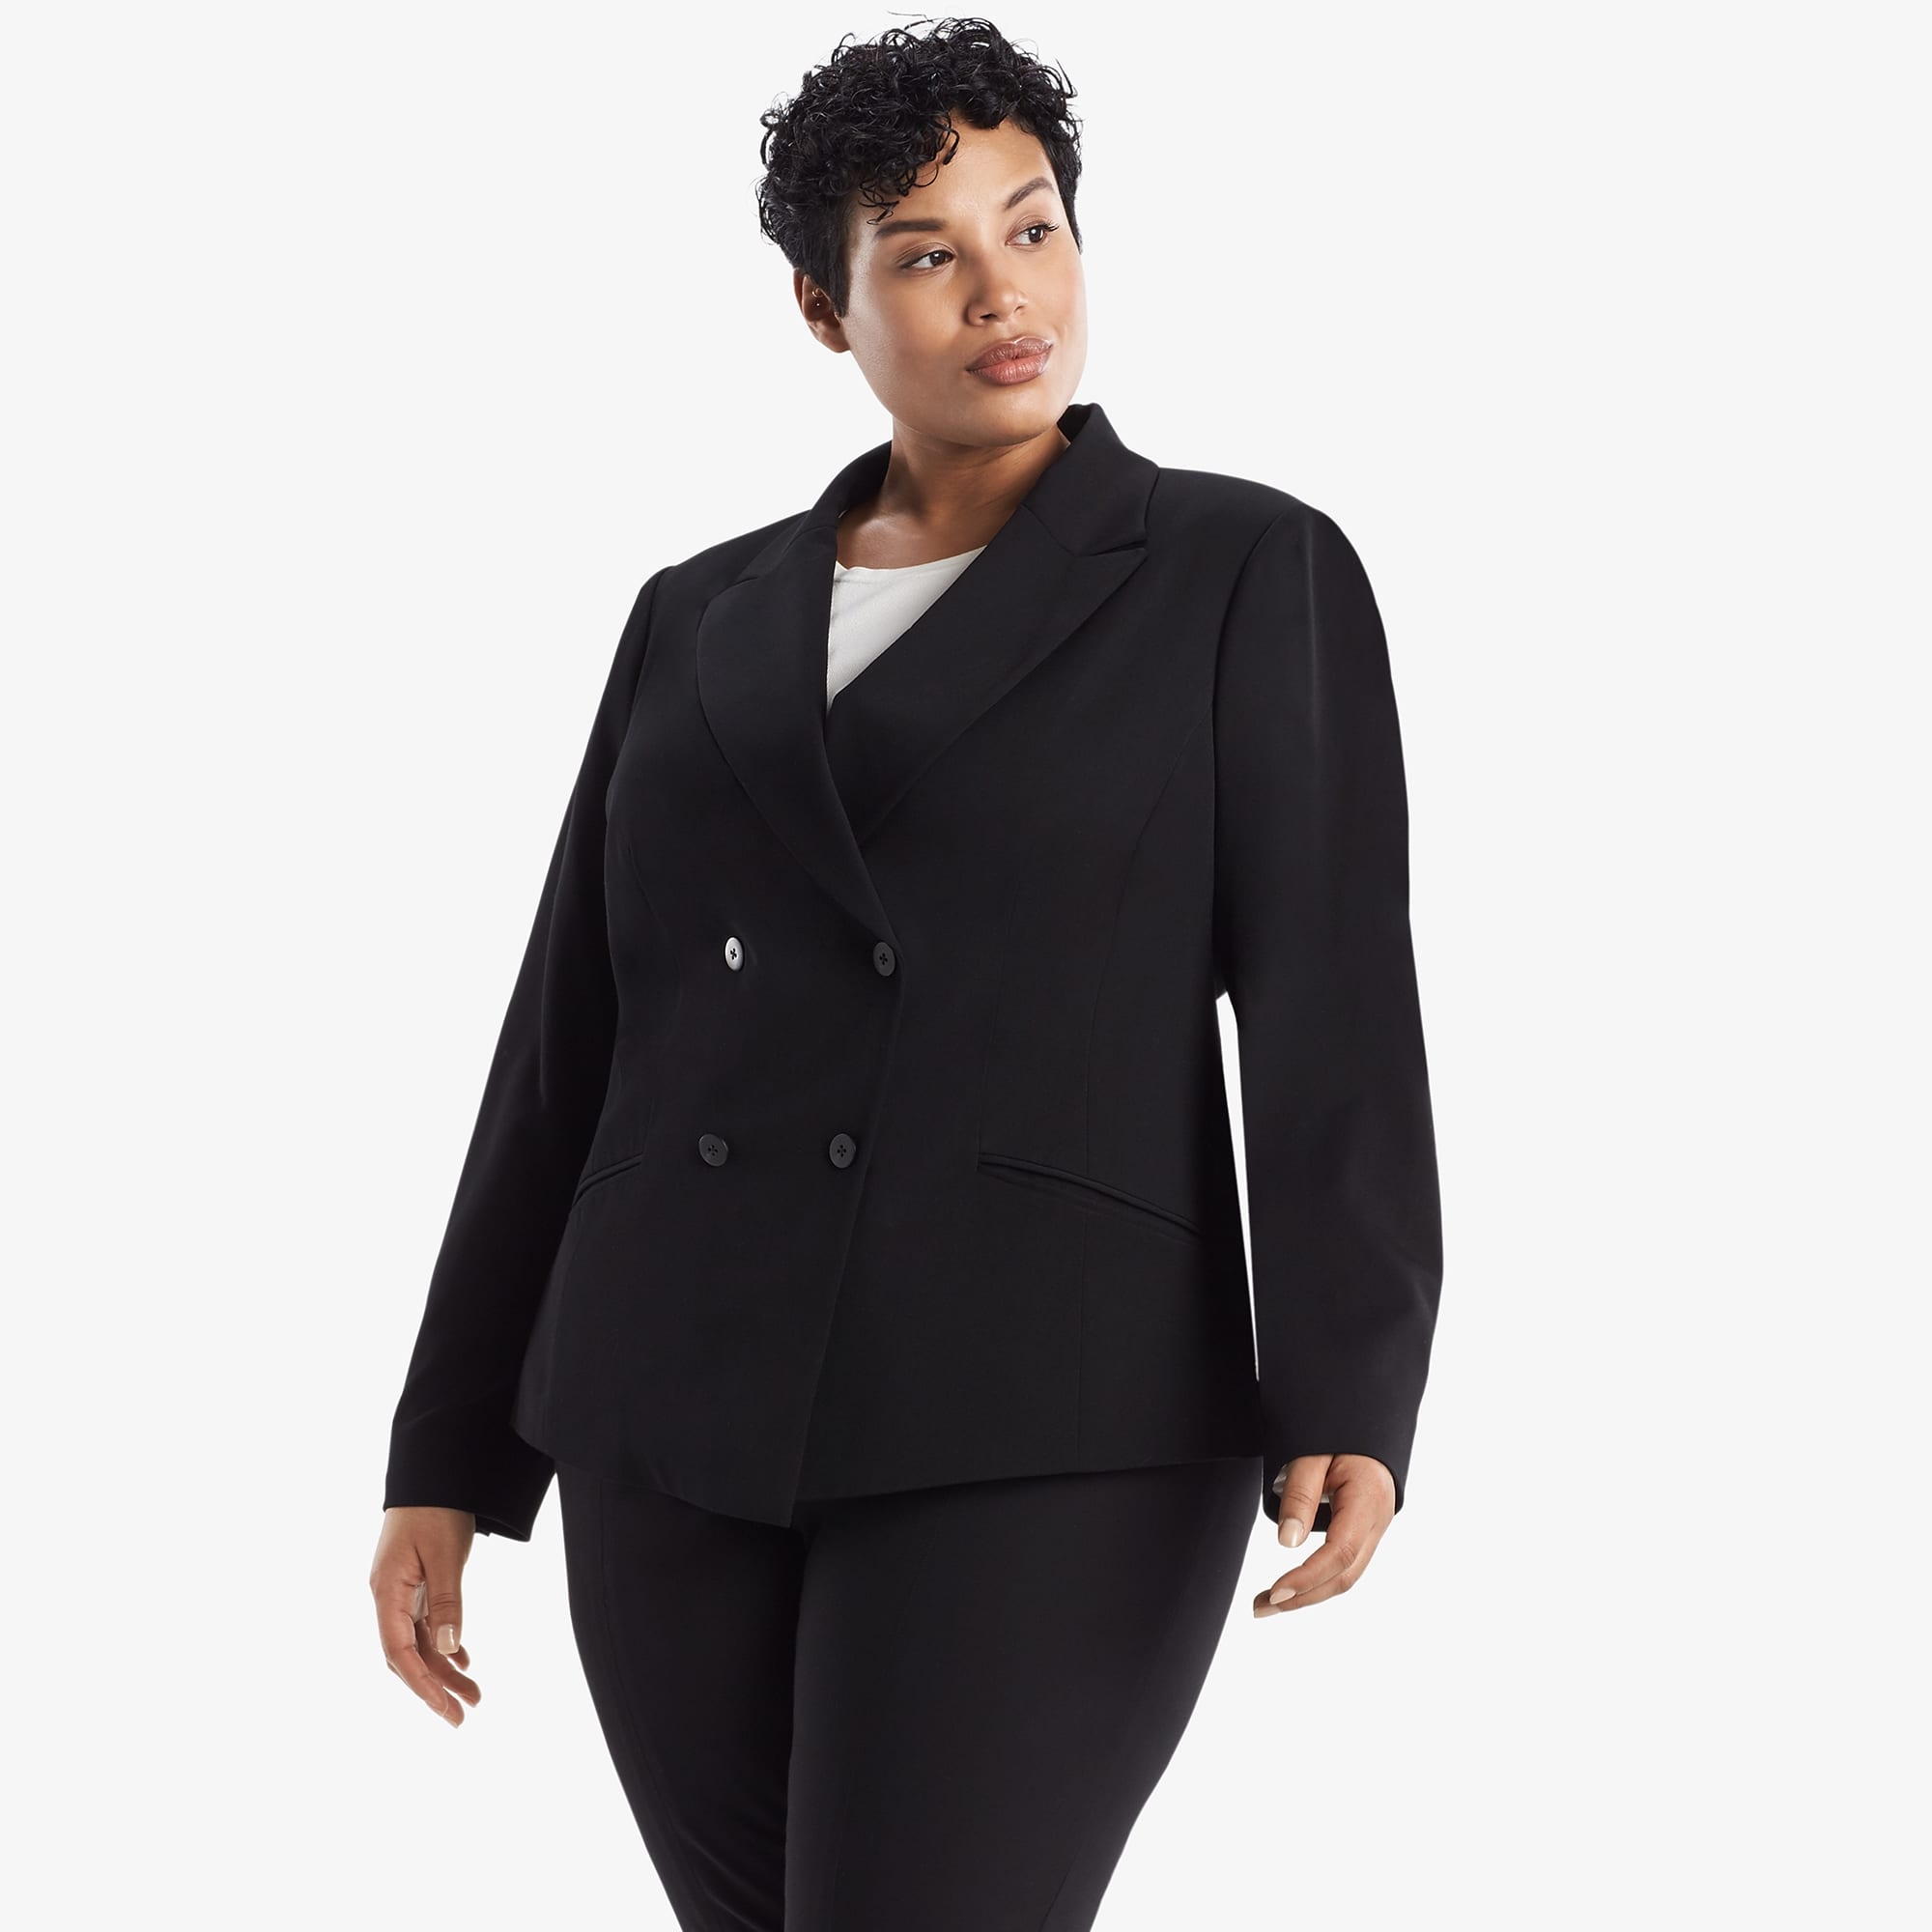 Side image of a woman standing wearing the Roxane Jacket in black